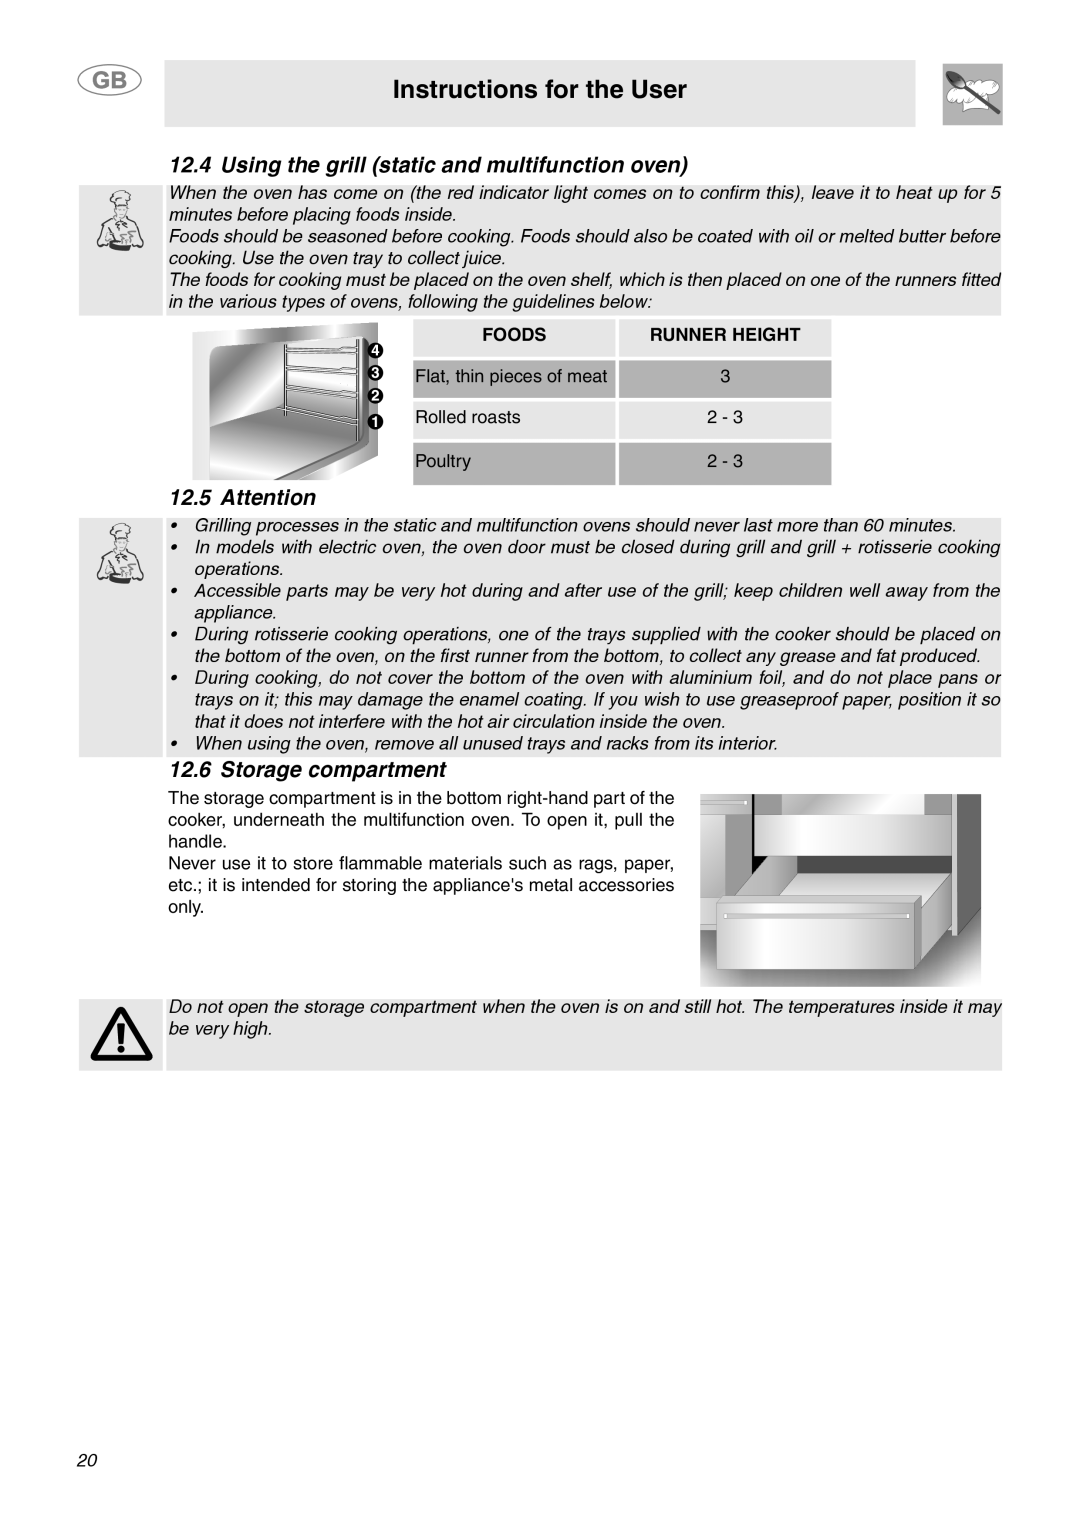 Smeg SY4110 manual Storage compartment, Instructions for the User, Foods, Runner Height 